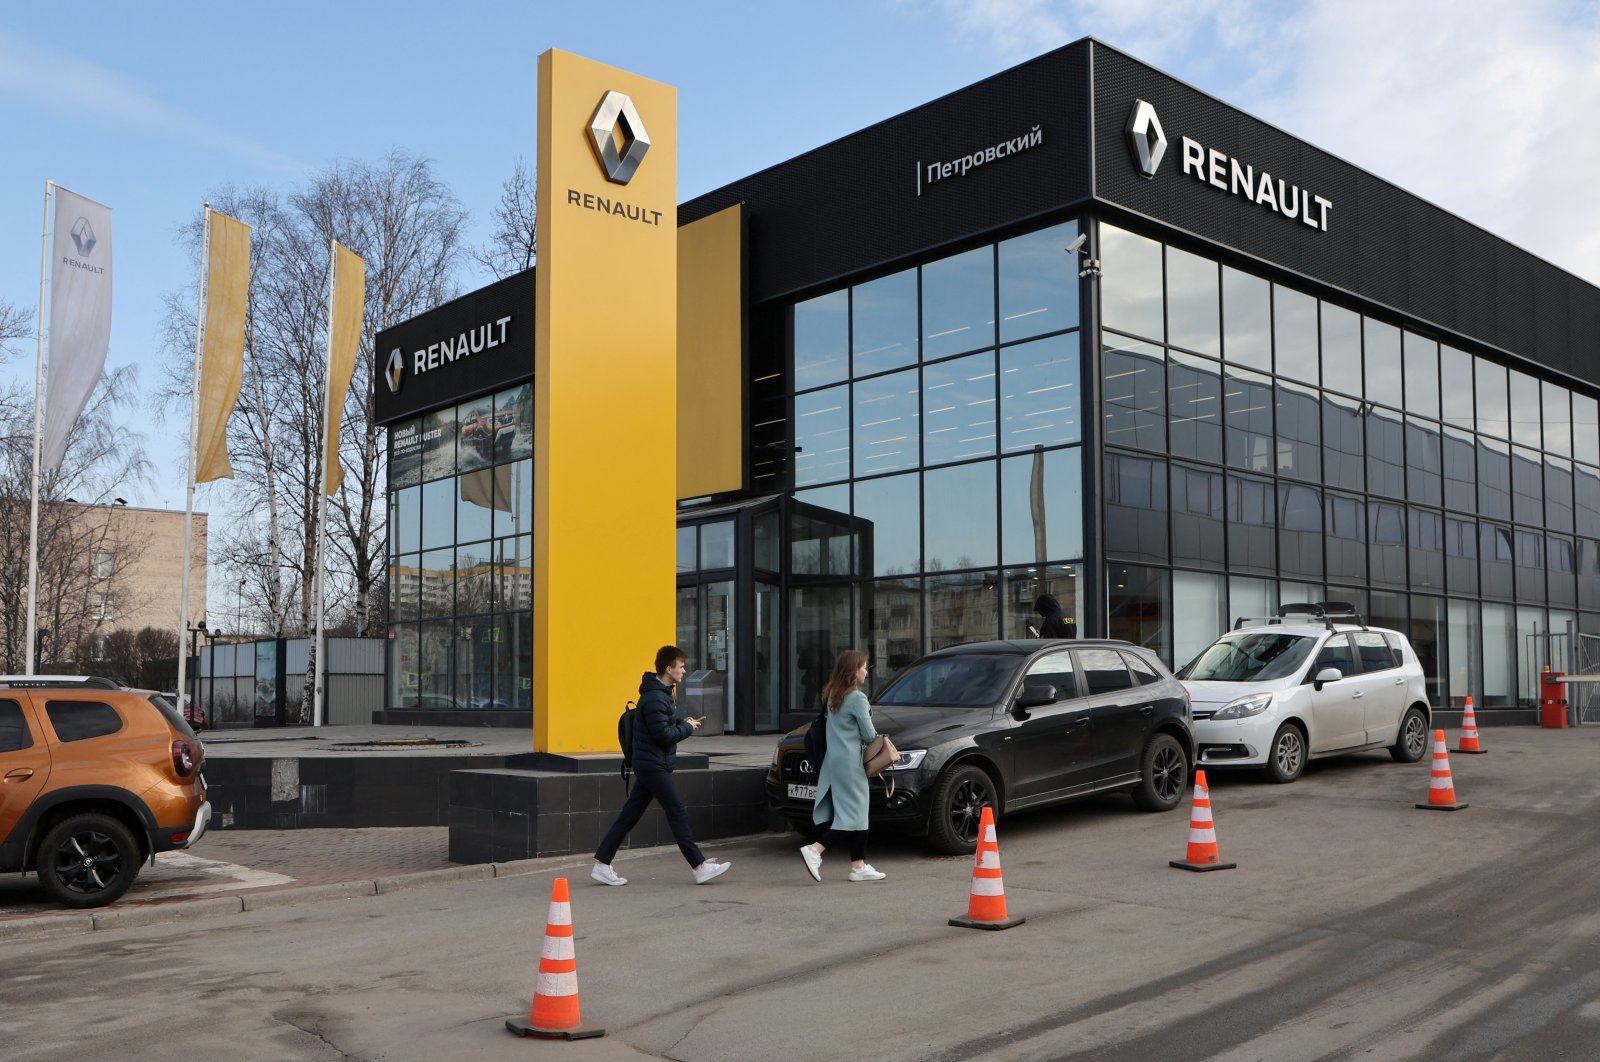 A view shows a Renault car showroom in St. Petersburg, Russia, March 24, 2022. (Reuters Photo)